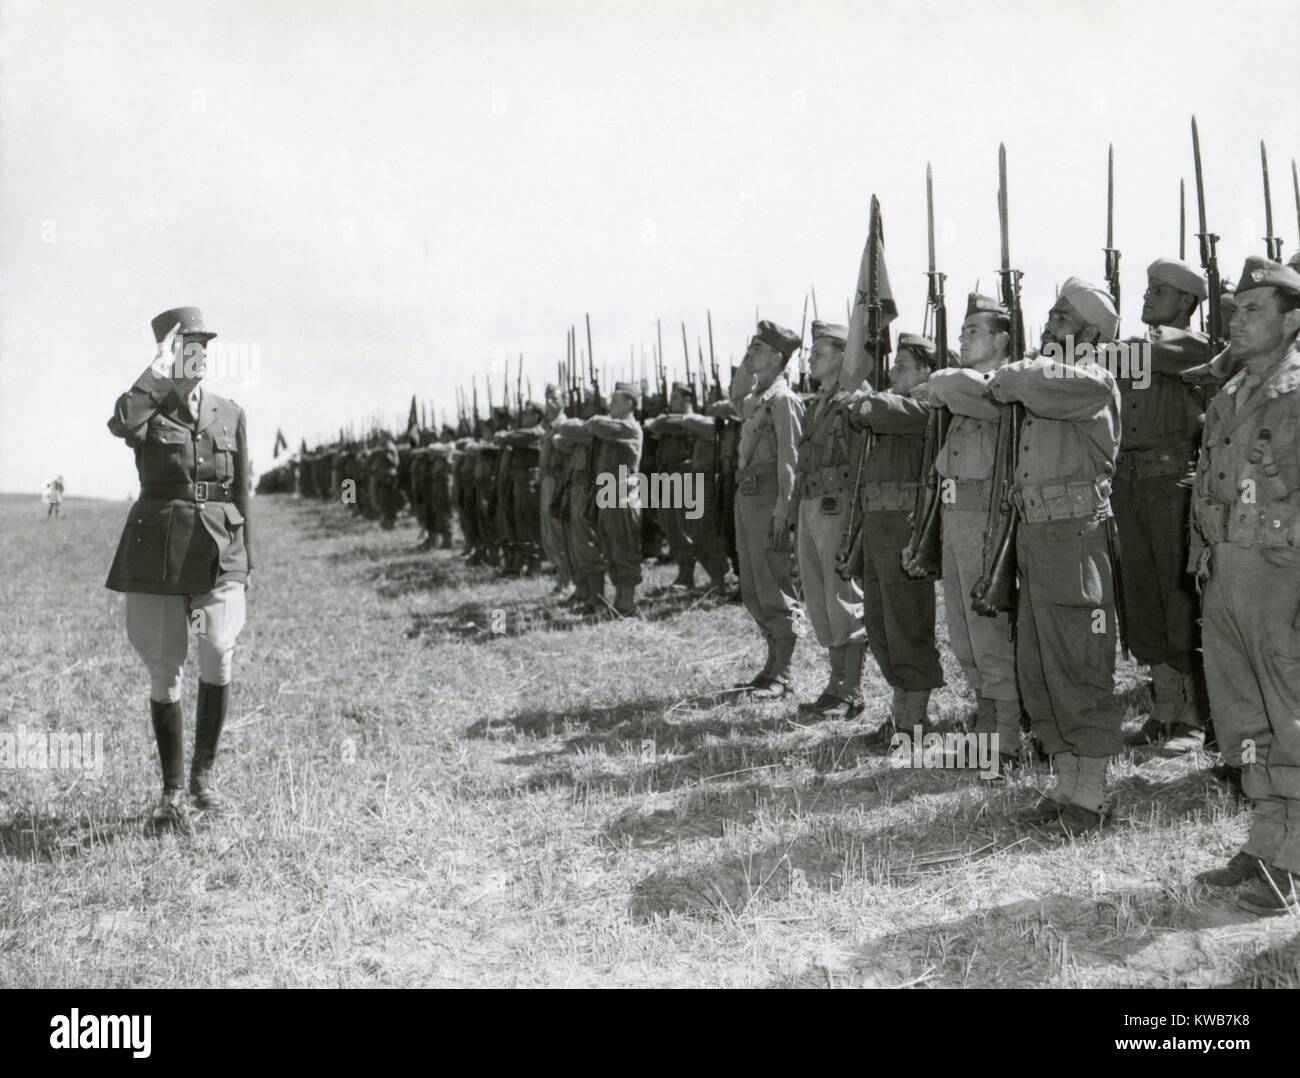 General Charles DeGaulle reviews French Expeditionary Forces. Montenero area, Italy, June 29, 1944. World War 2. (BSLOC 2014 8 143) Stock Photo